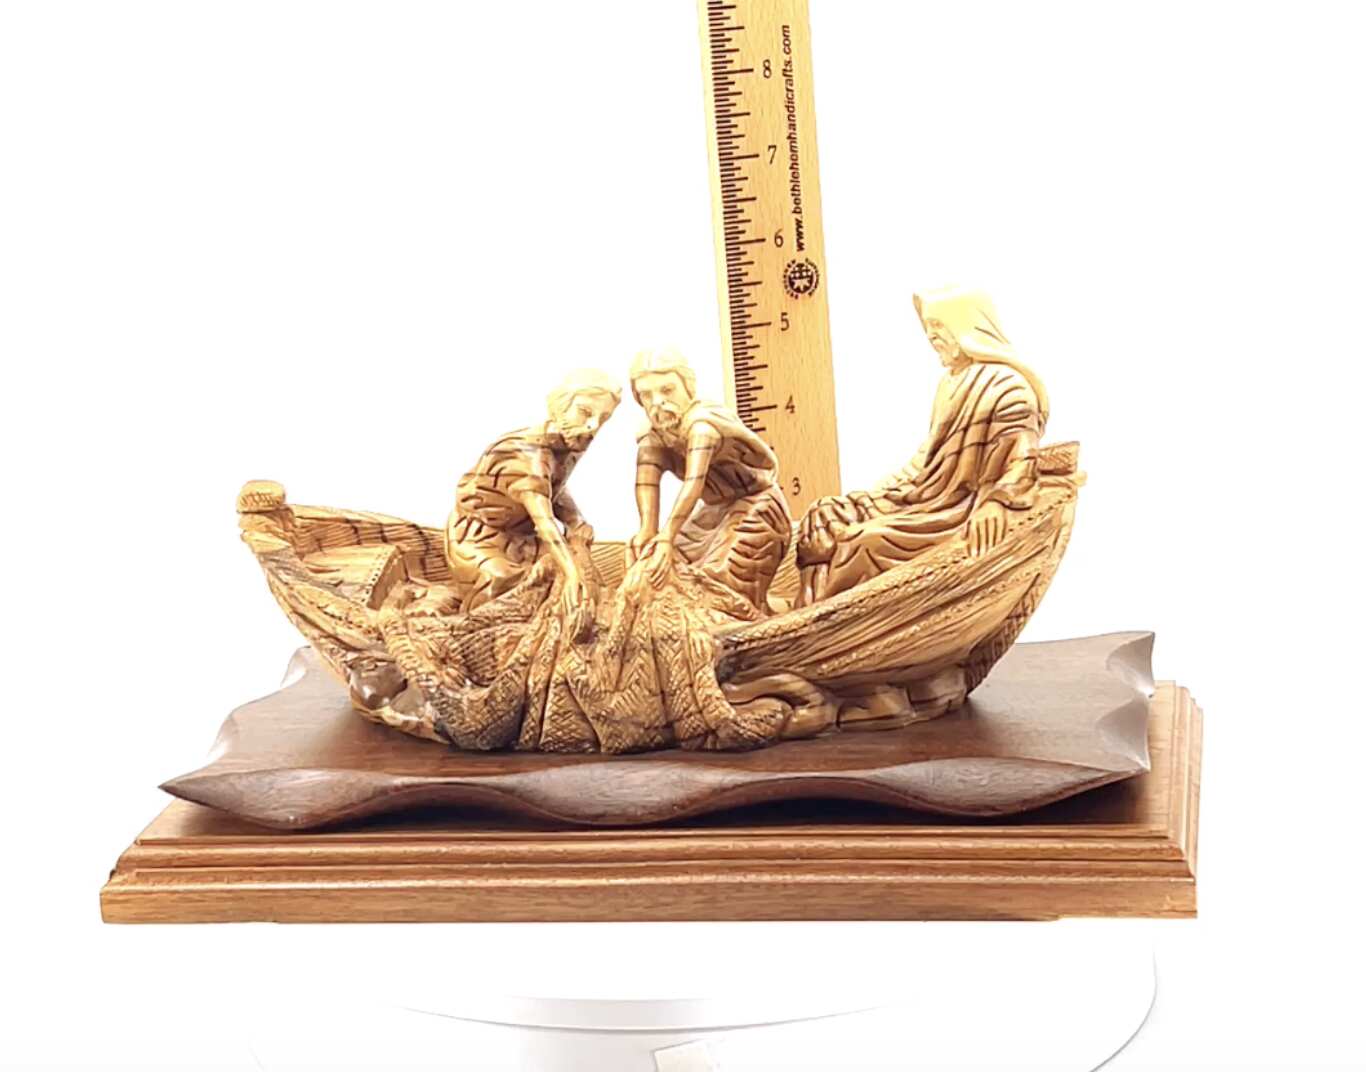 Jesus Christ "Miracle of Fisherman", 11.4" Long, Holy Land Olive Wood Sculpture